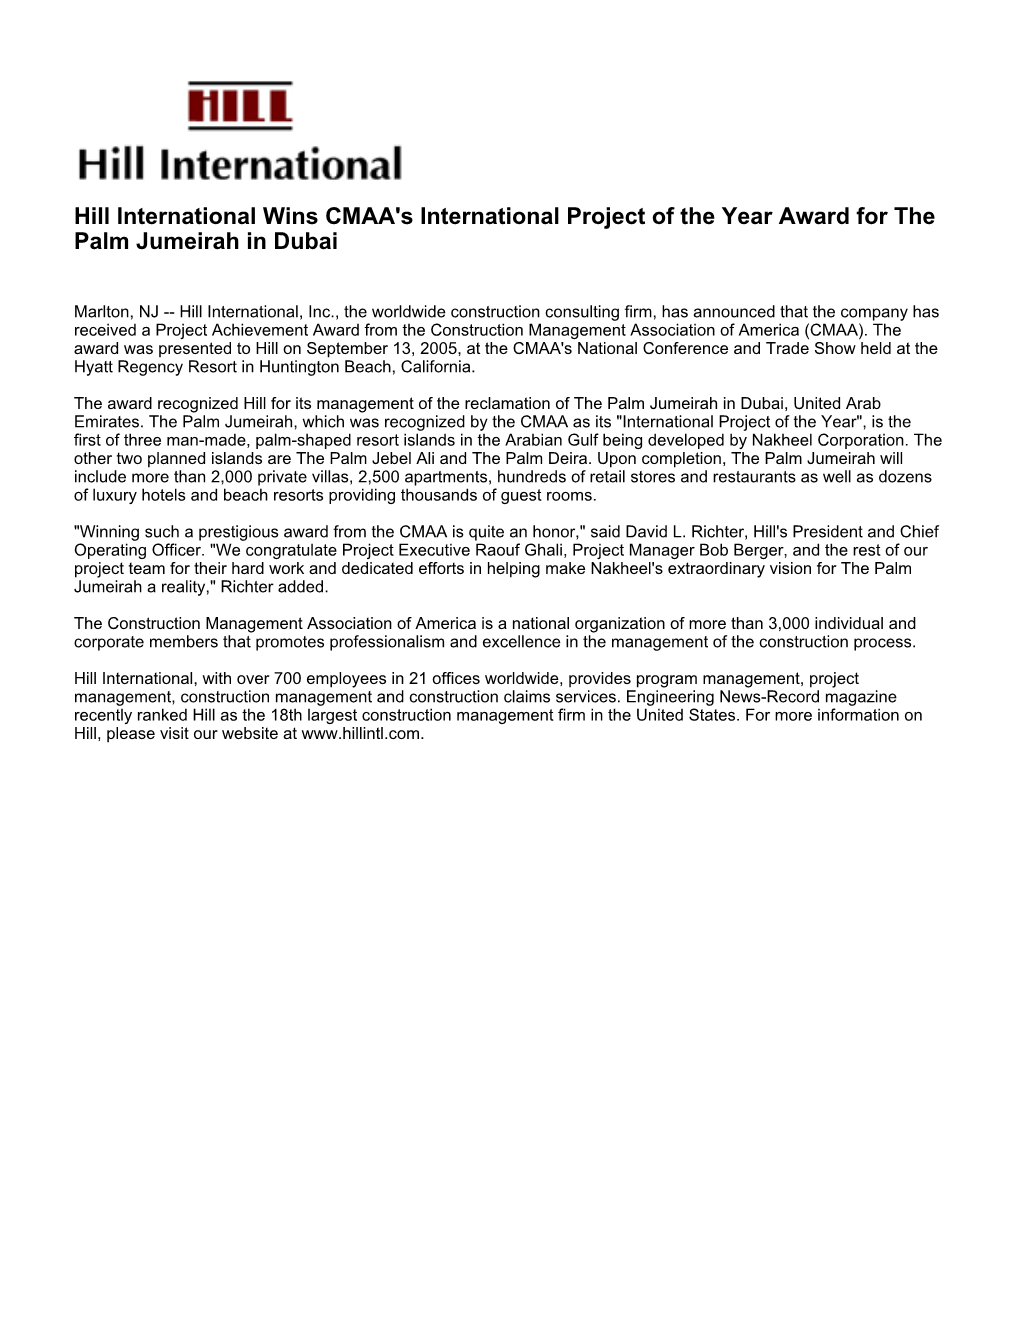 Hill International Wins CMAA's International Project of the Year Award for the Palm Jumeirah in Dubai